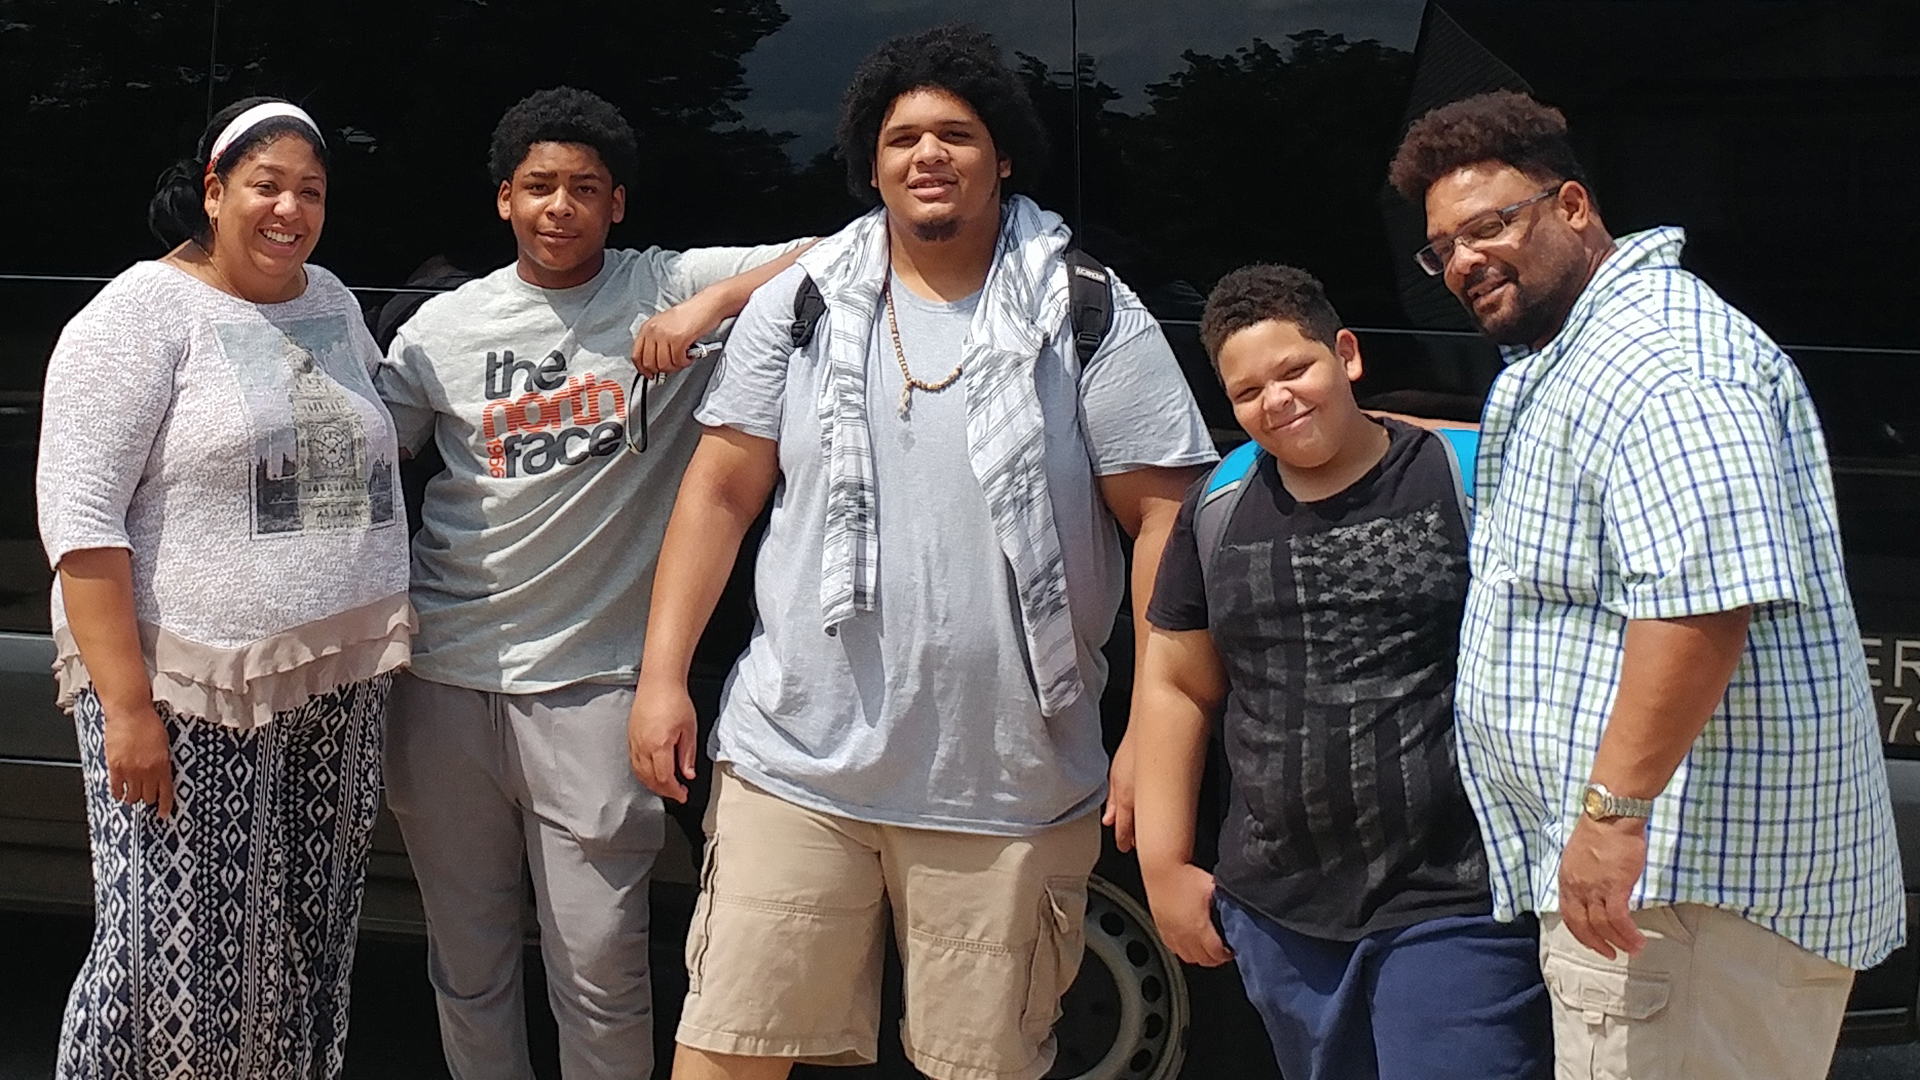 How This Family of Five Lost Over 300 Pounds